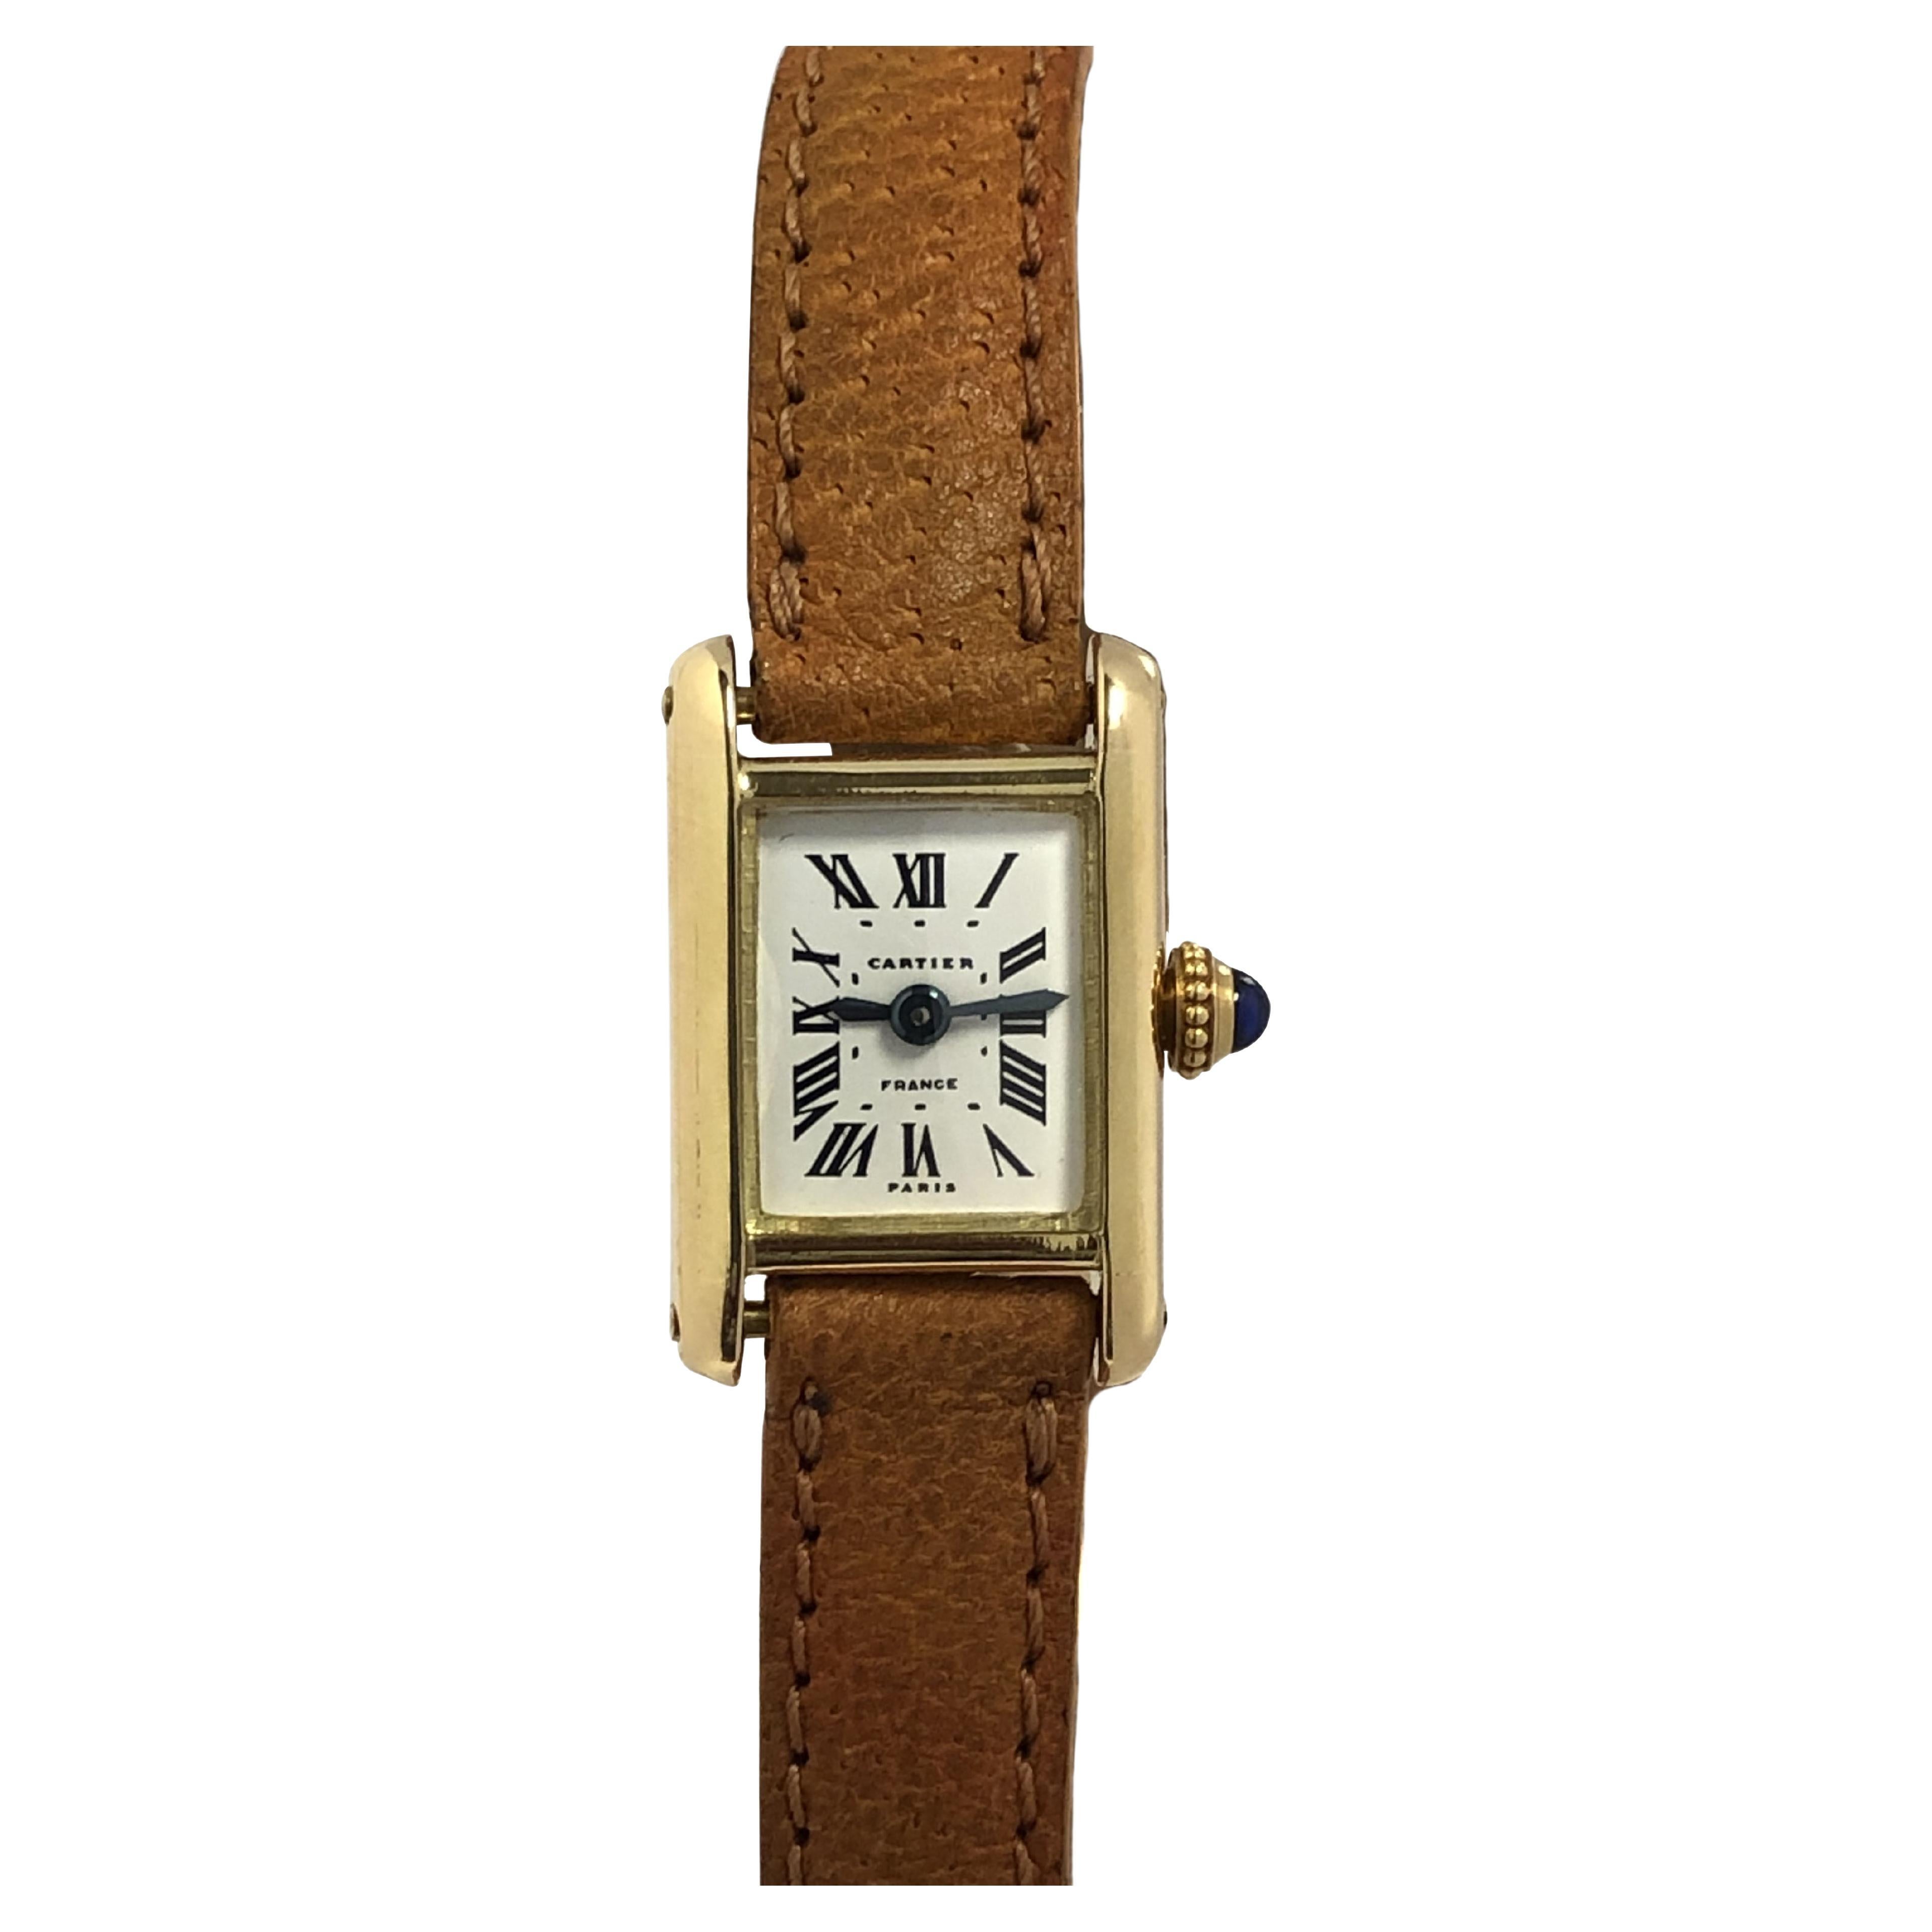 How can I tell if a vintage Cartier watch is real?